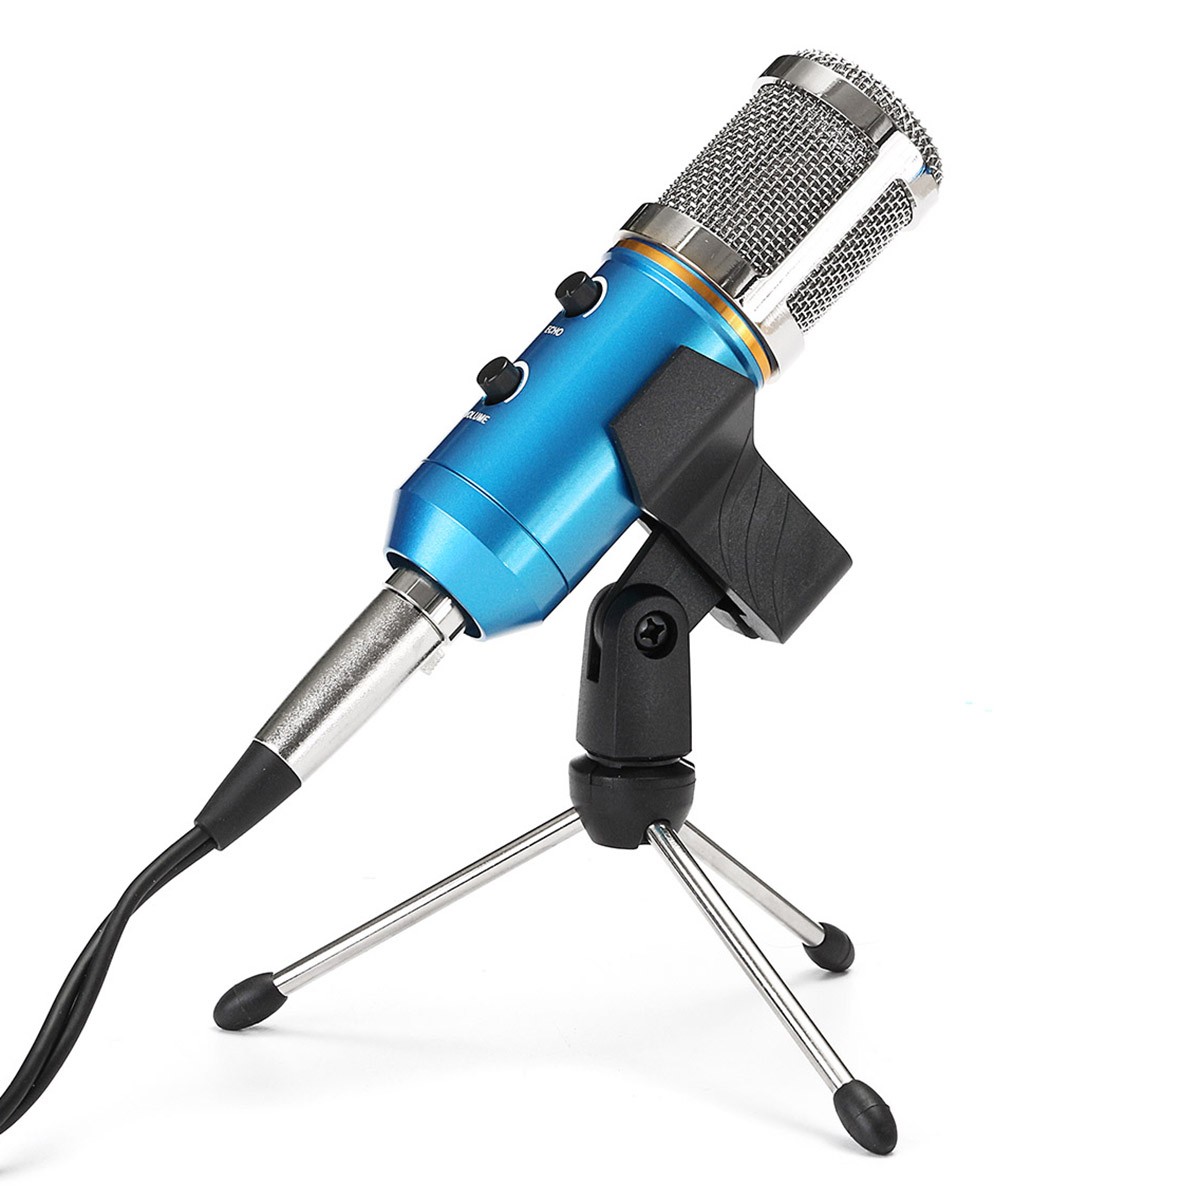 MK-F200TL-Audio-USB-Condenser-Microphone-Sound-Recording-Vocal-Microphone-Mic-Stand-Mount-1156826